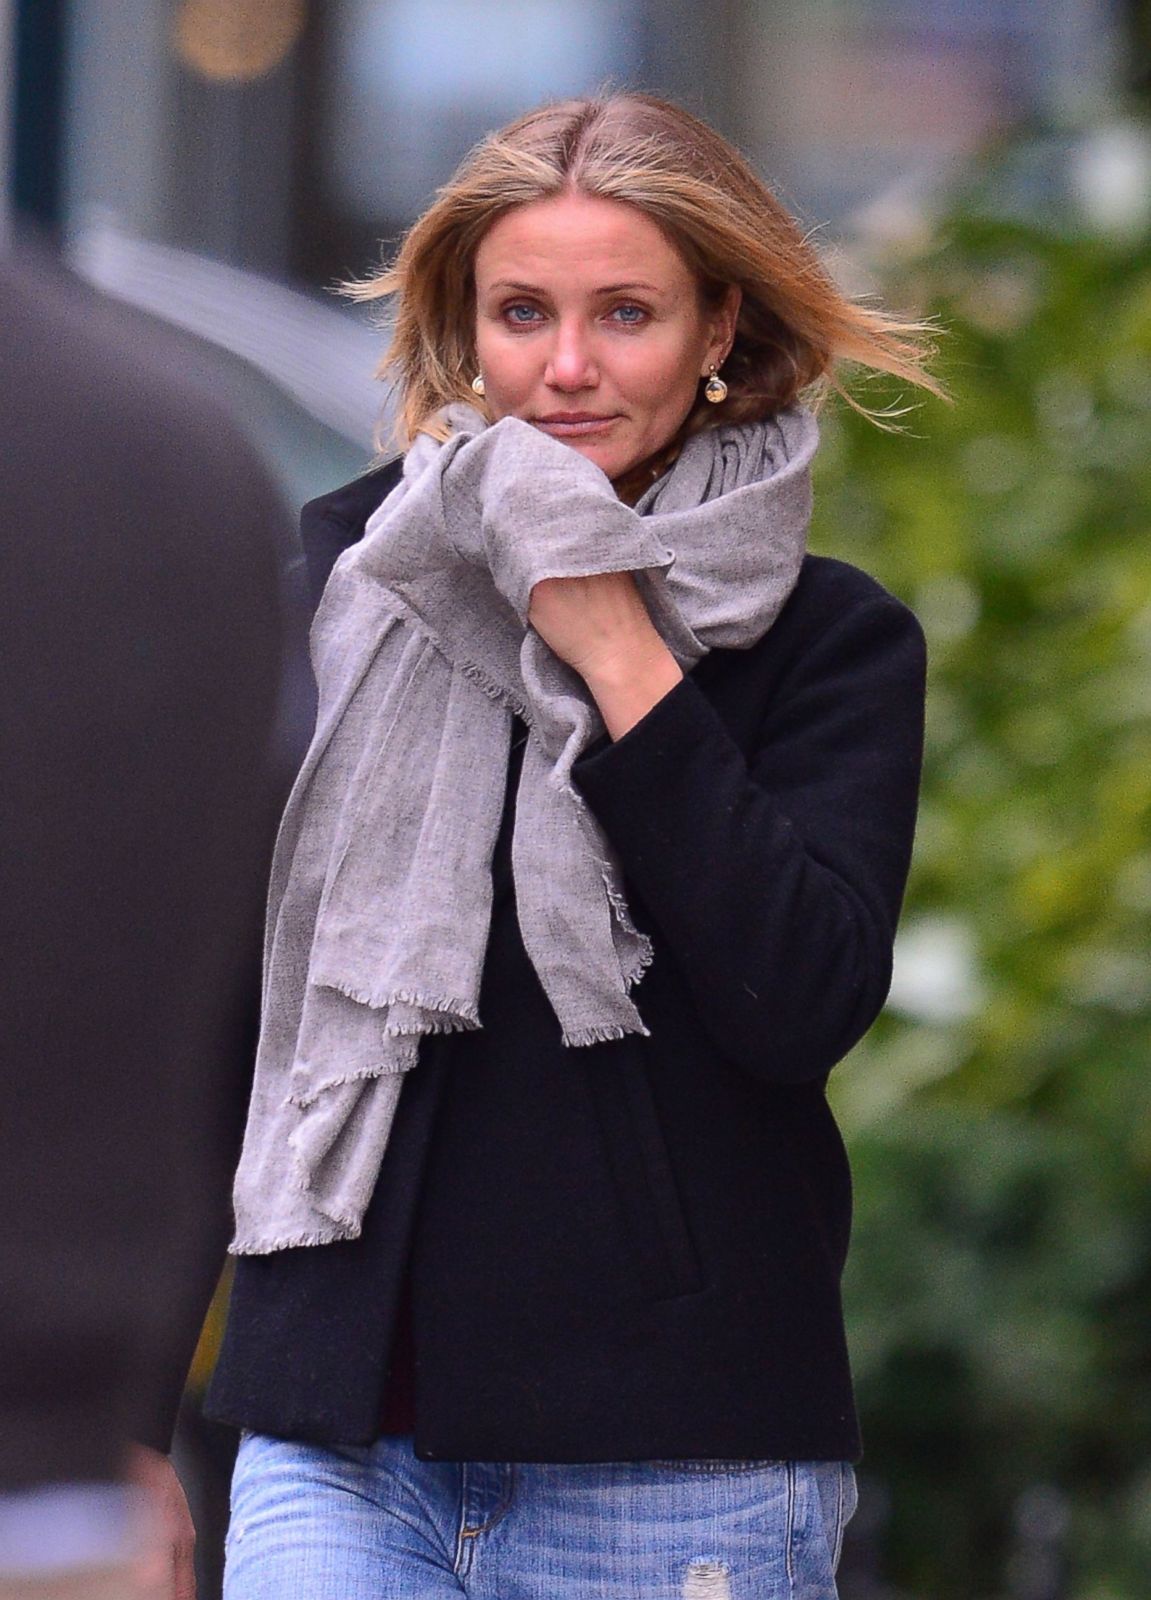 Cameron Diaz Braces For Winter Picture  November's Top Celebrity Pictures  - ABC News